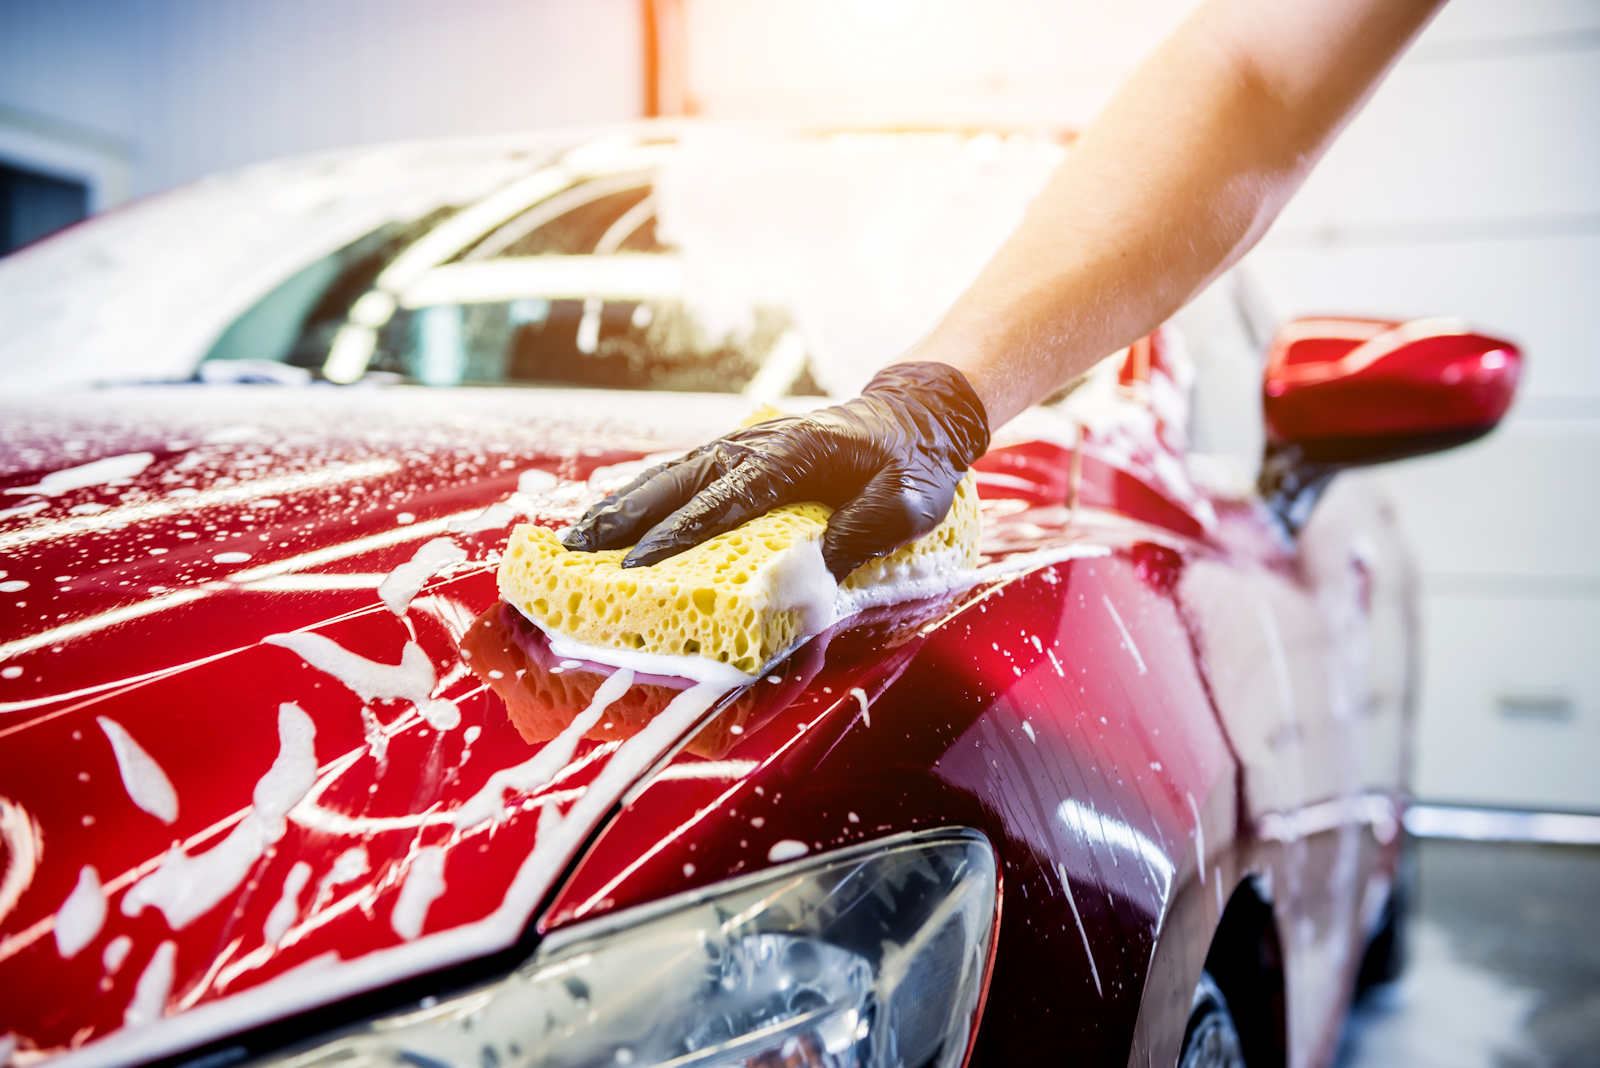 B2 Car Wash and Detailing in Tampa